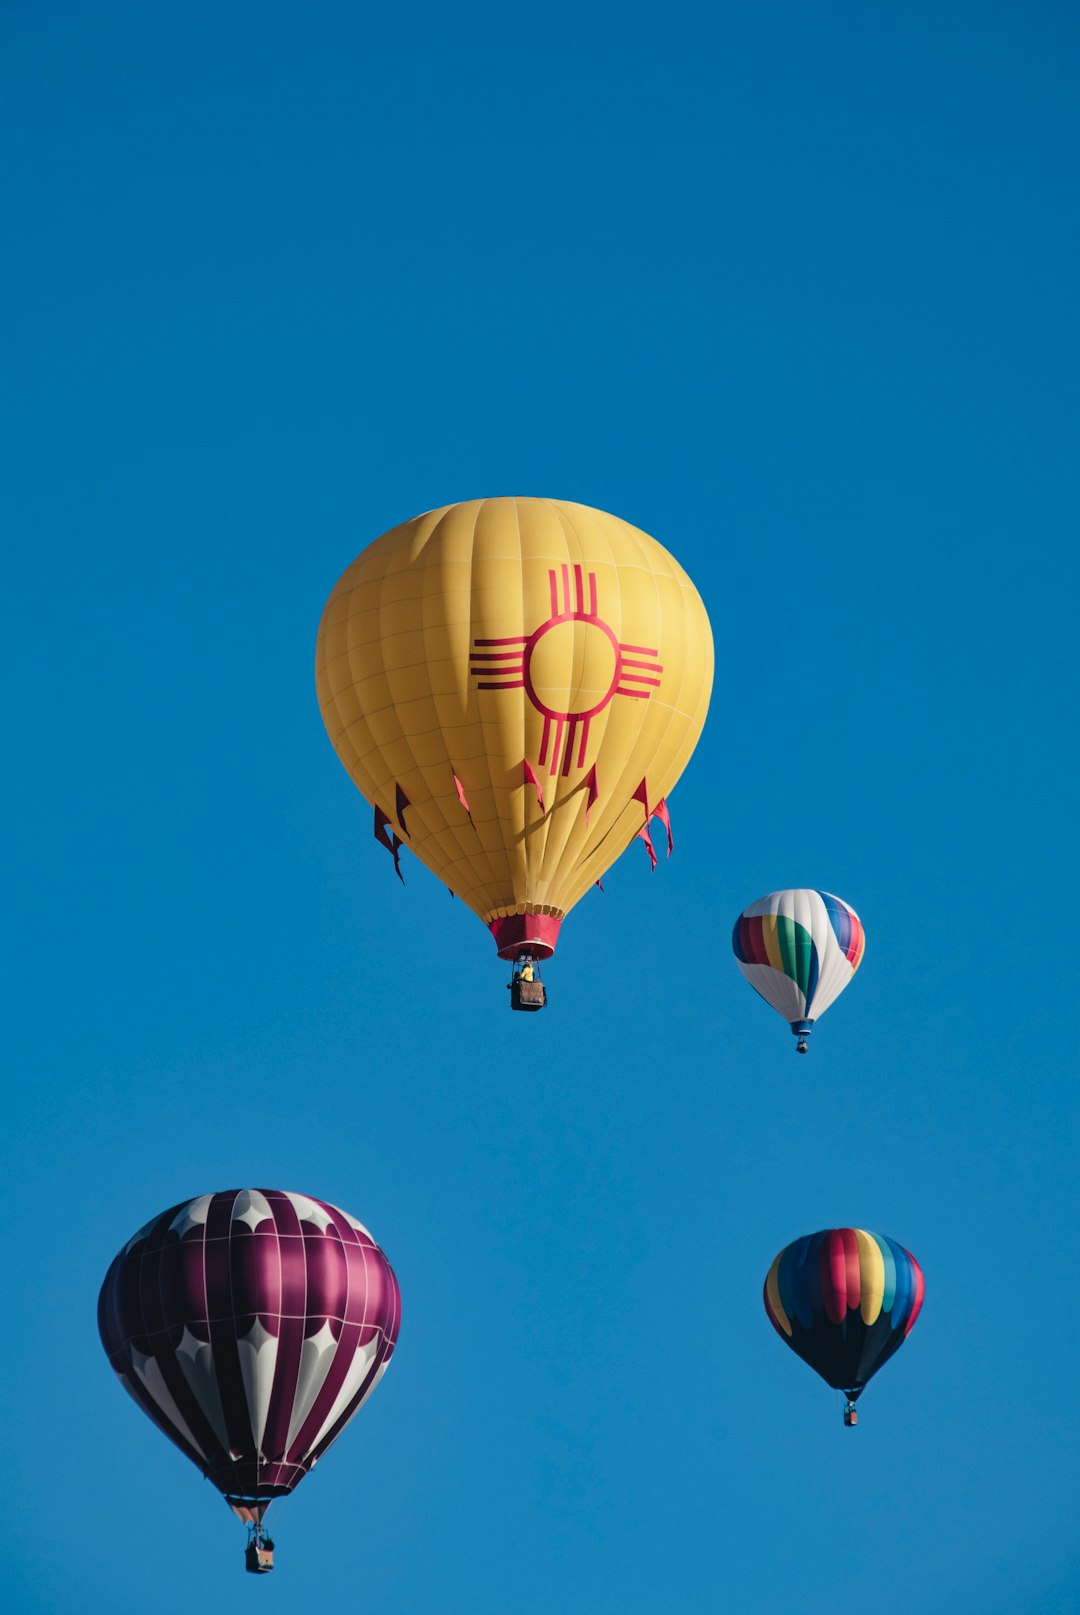 yellow hot air balloon in mid air under blue sky during daytime